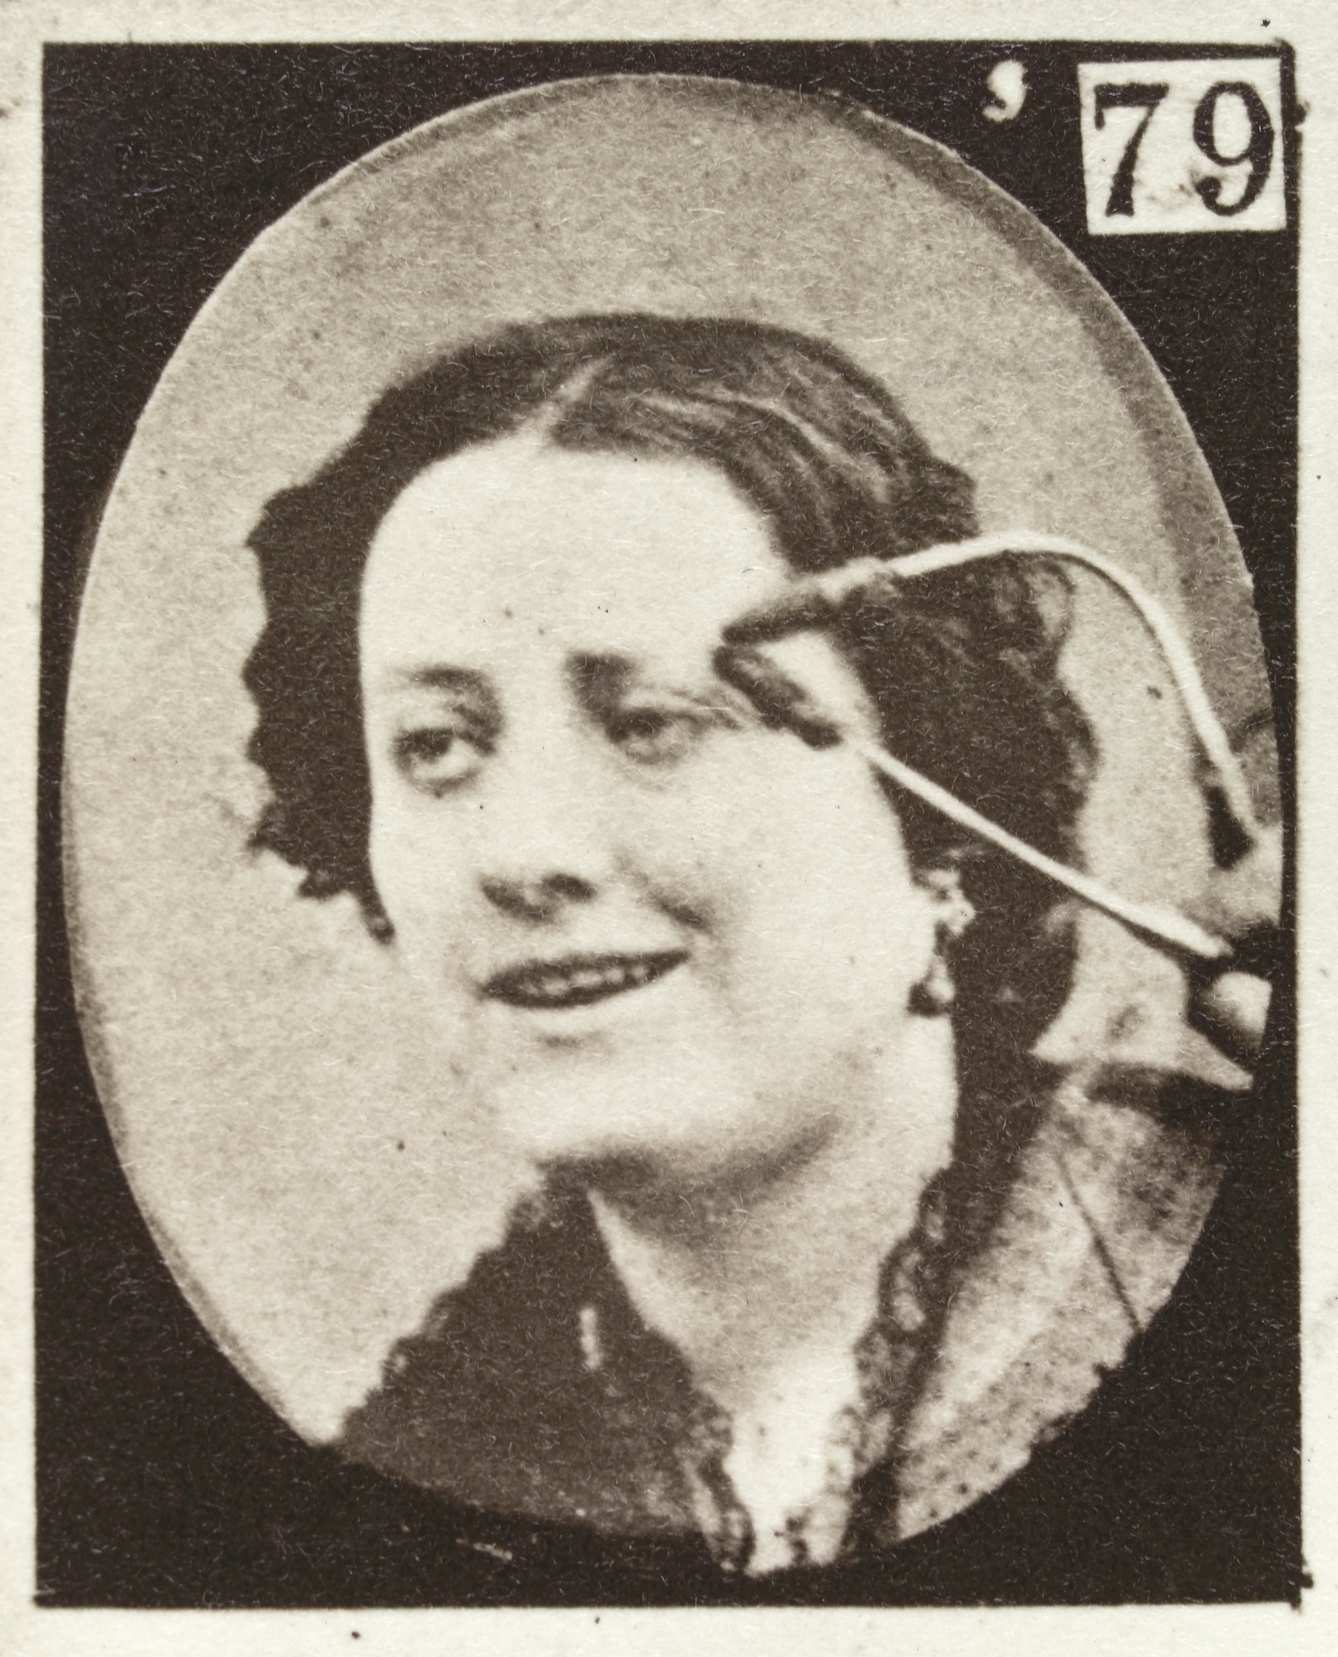 Photograph of a woman's face electrically stimulated by electrodes to show joy